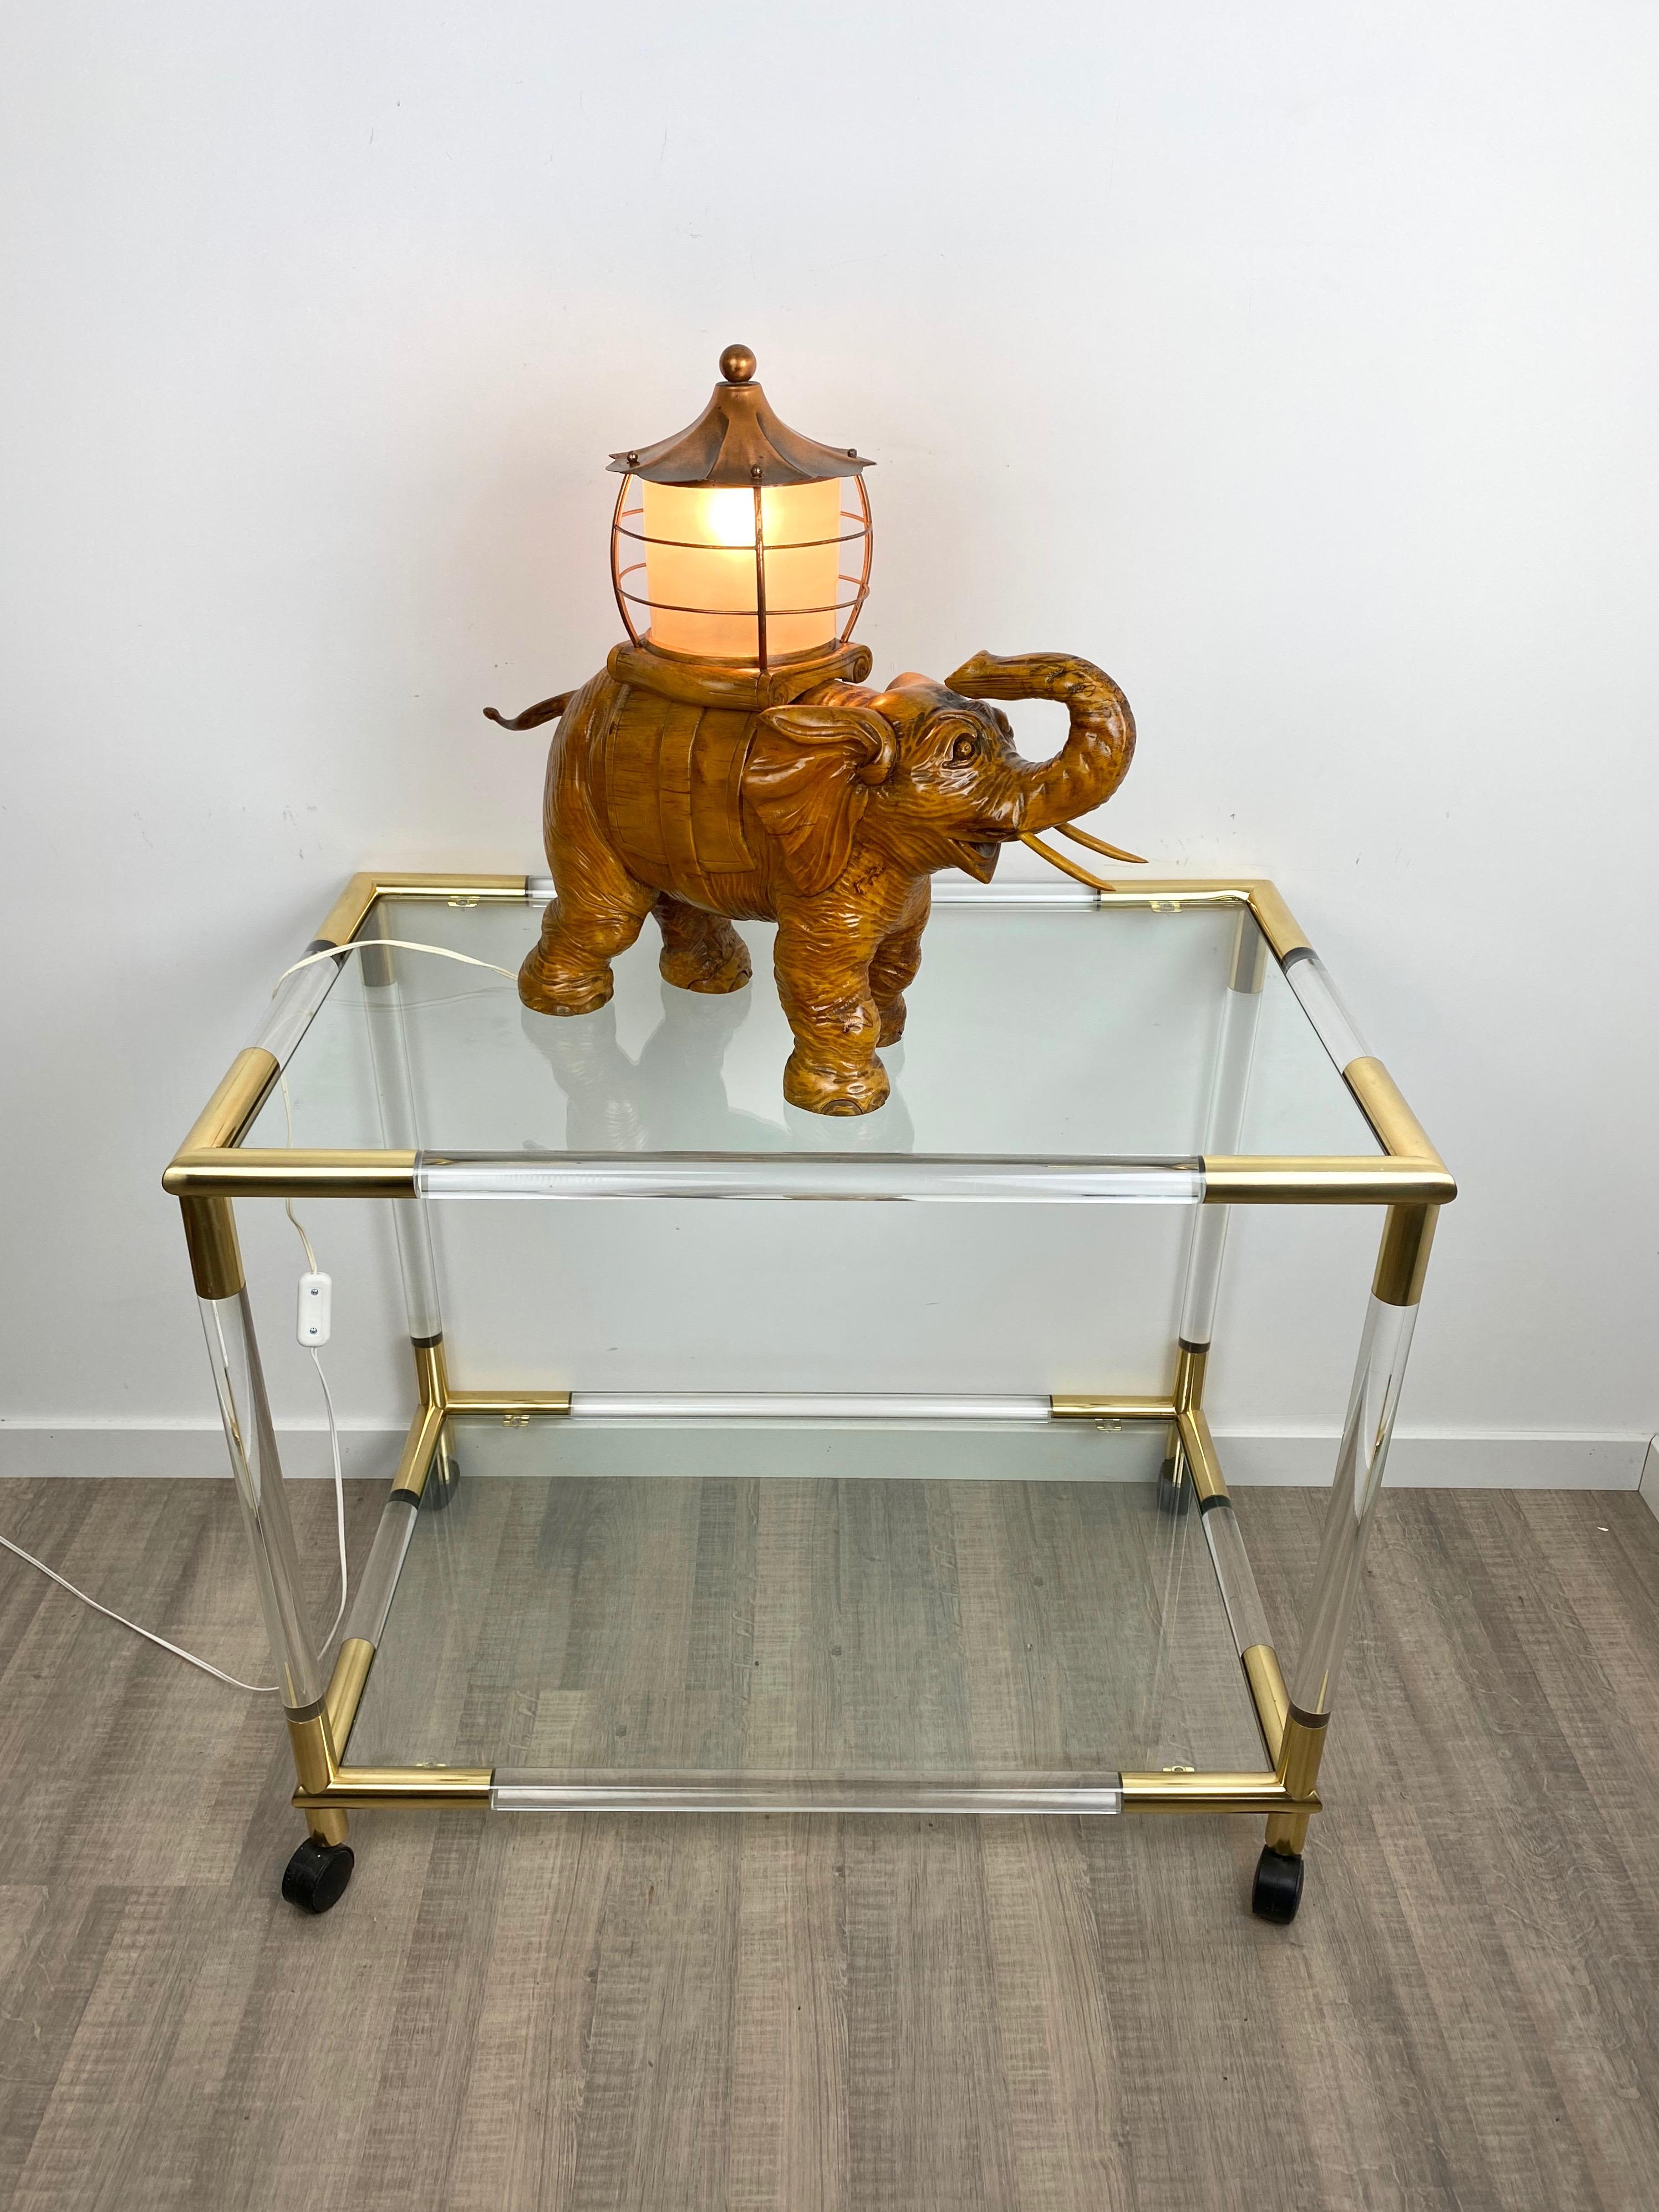 Elephant Table Lamp Hand Carved Wood and Copper Aldo Tura for Macabo Italy 1950s For Sale 3